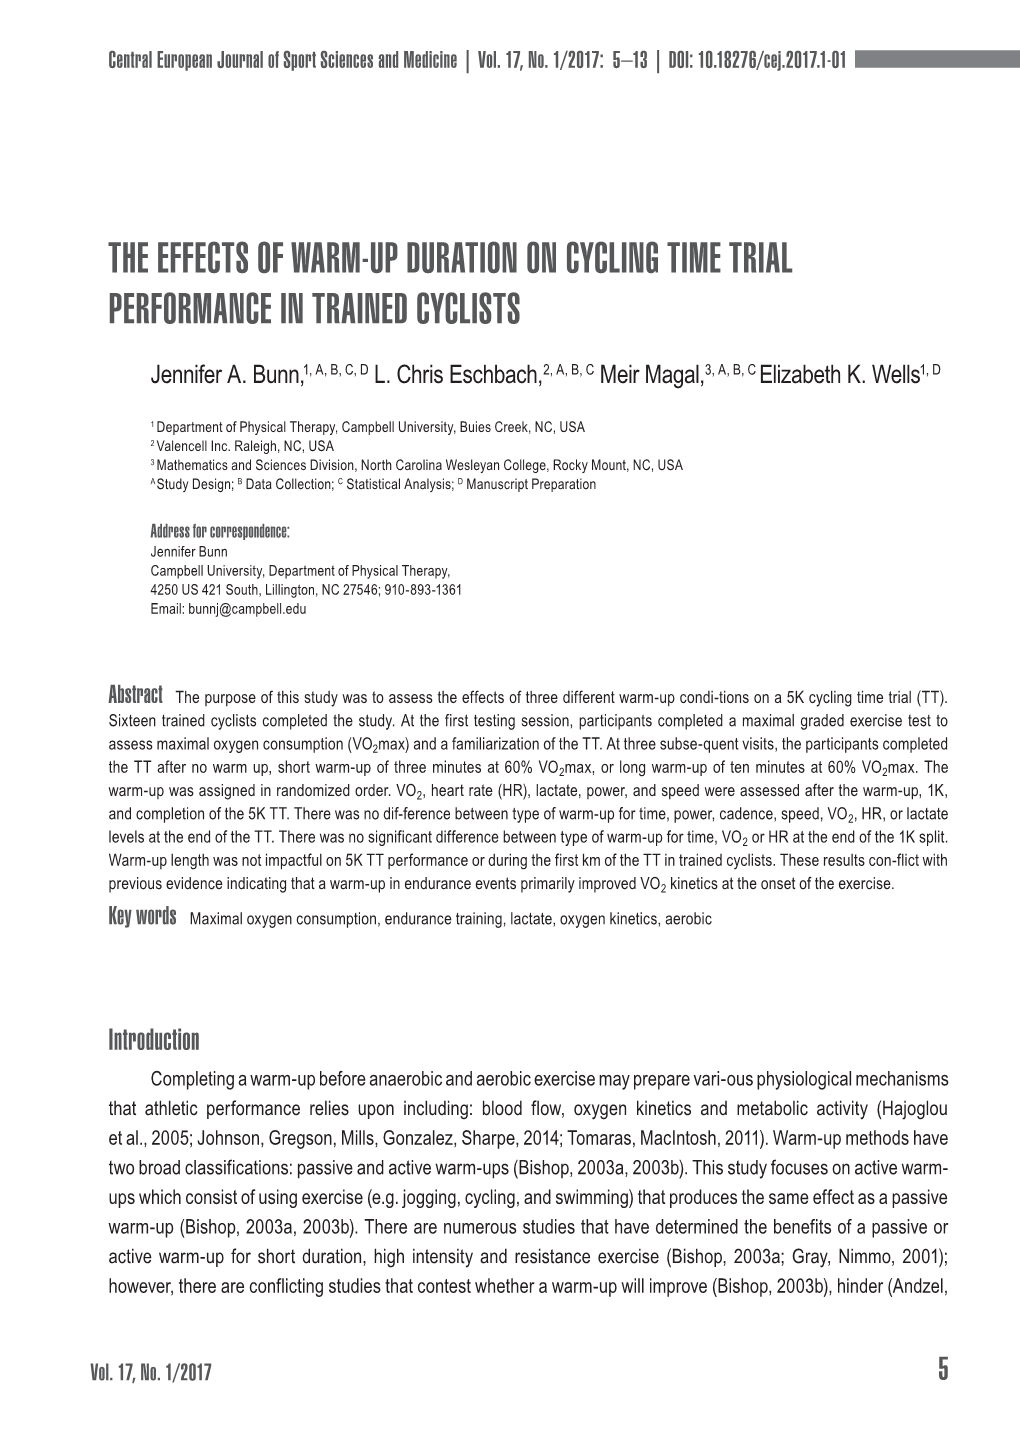 The Effects of Warm-Up Duration on Cycling Time Trial Performance in Trained Cyclists